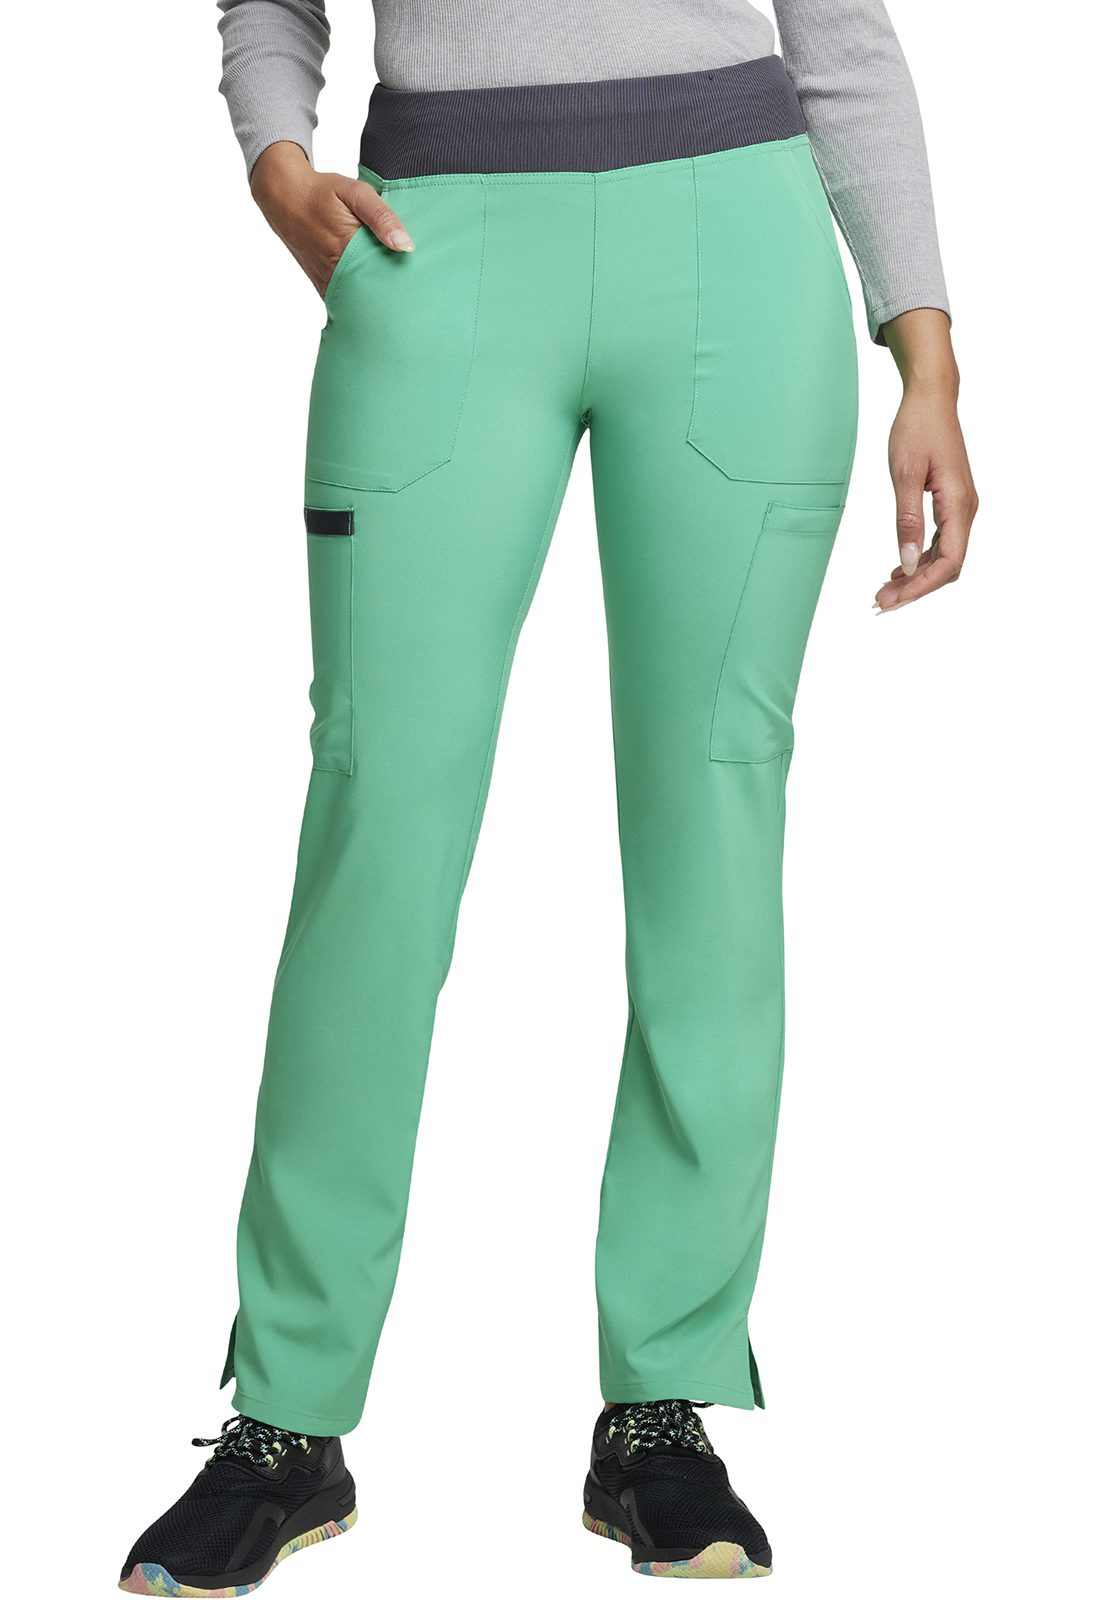 Natural Rise Tapered Leg Pull-On Pant